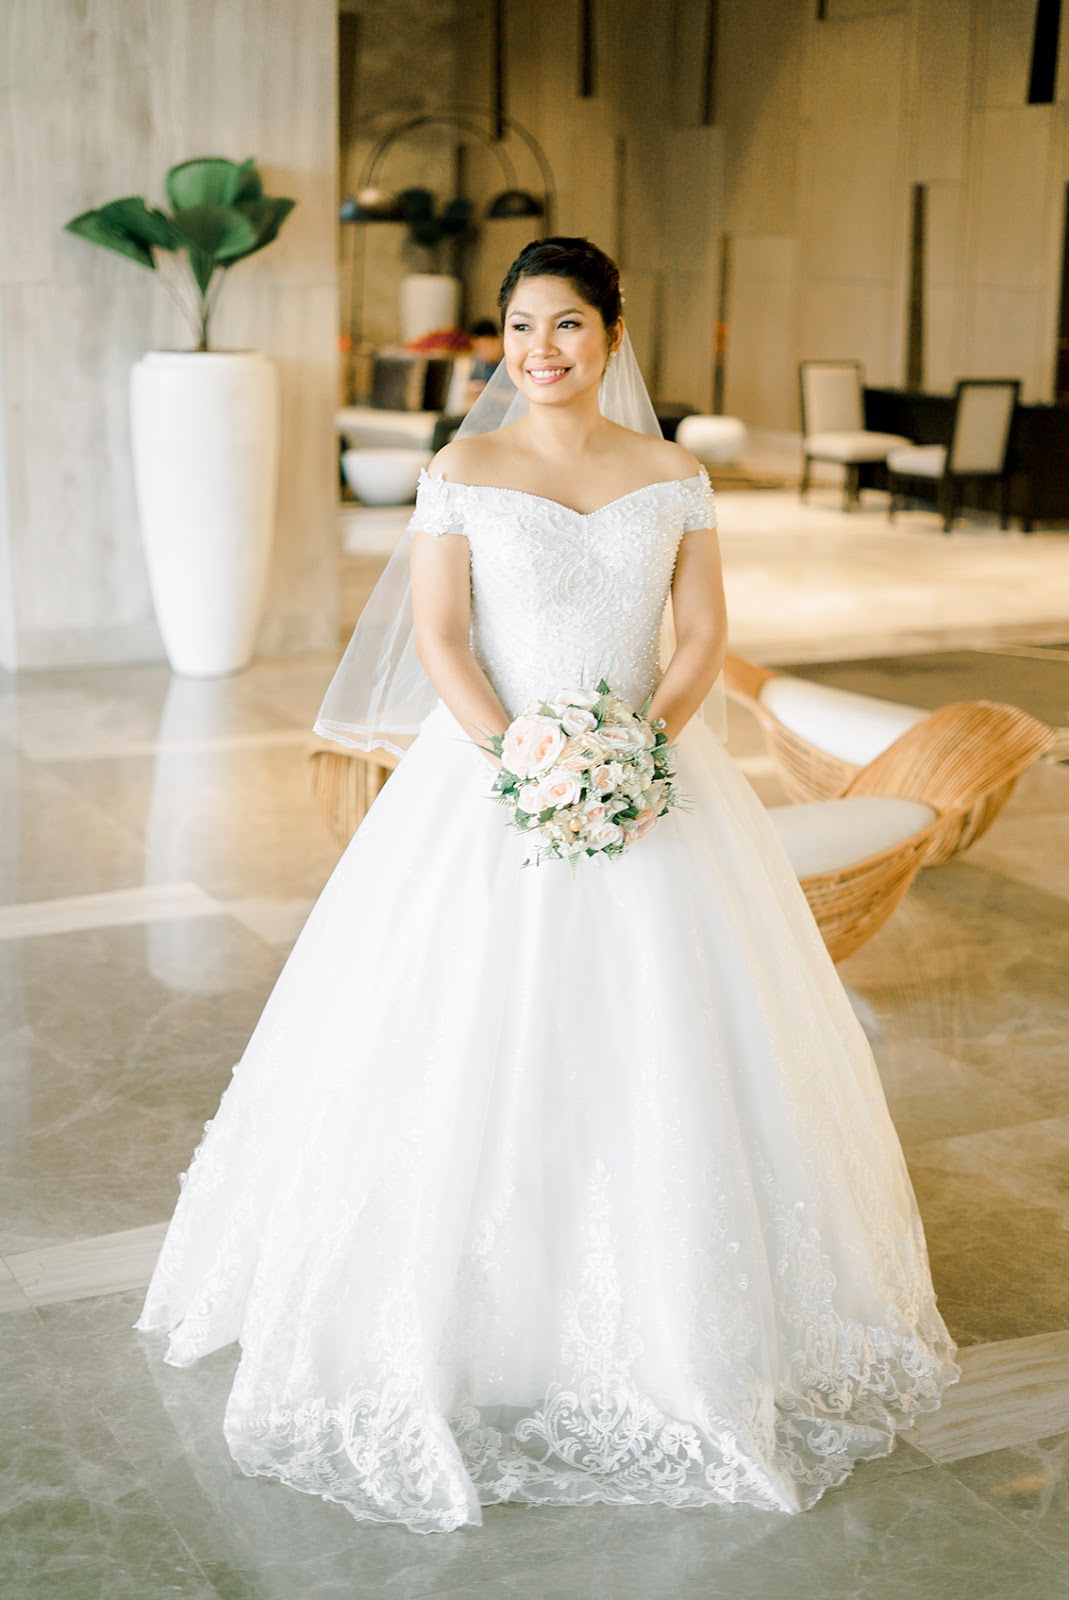 25 Wedding Gowns Under 25000 Pesos and Where to Buy Them